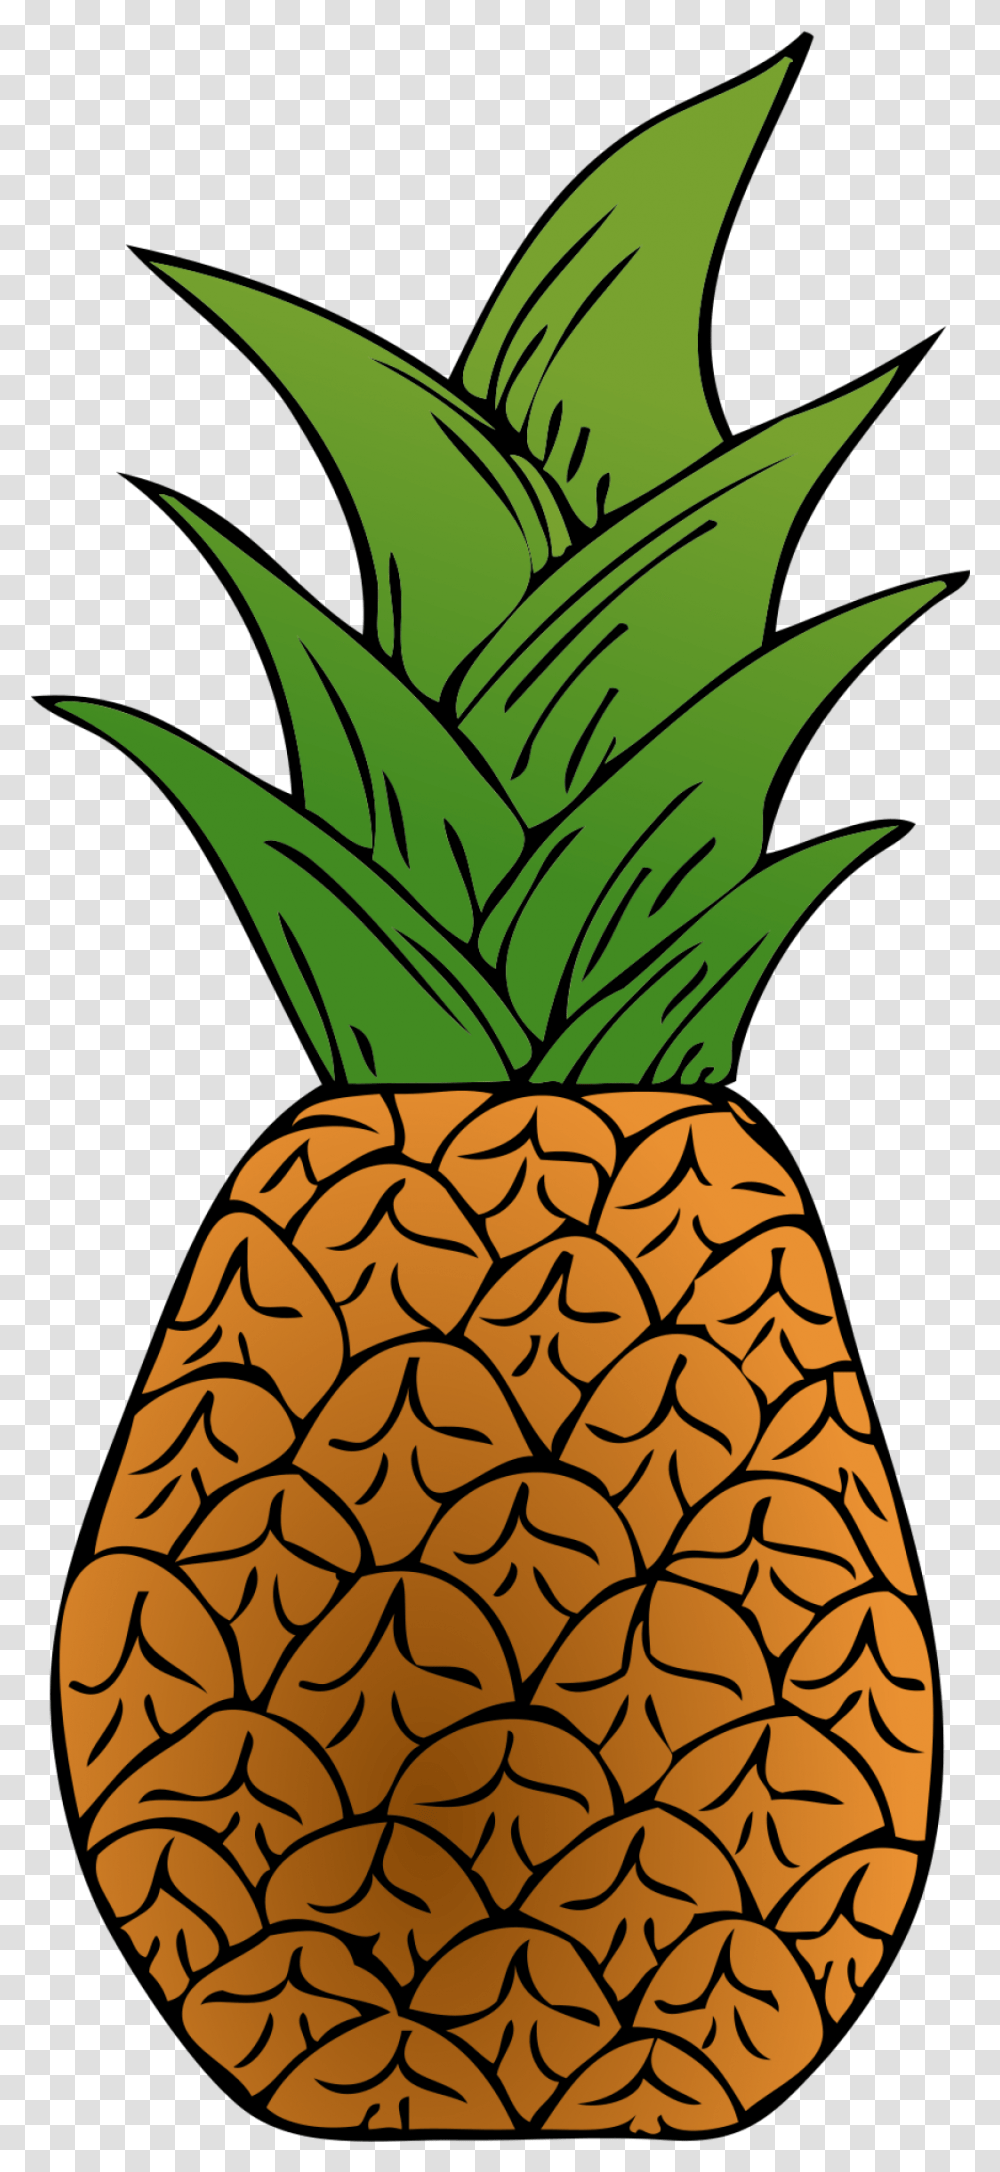 Pineapple Clip Arts For Web Clip Arts Free Backgrounds Pineapple Top Cartoon, Fruit, Plant, Food Transparent Png